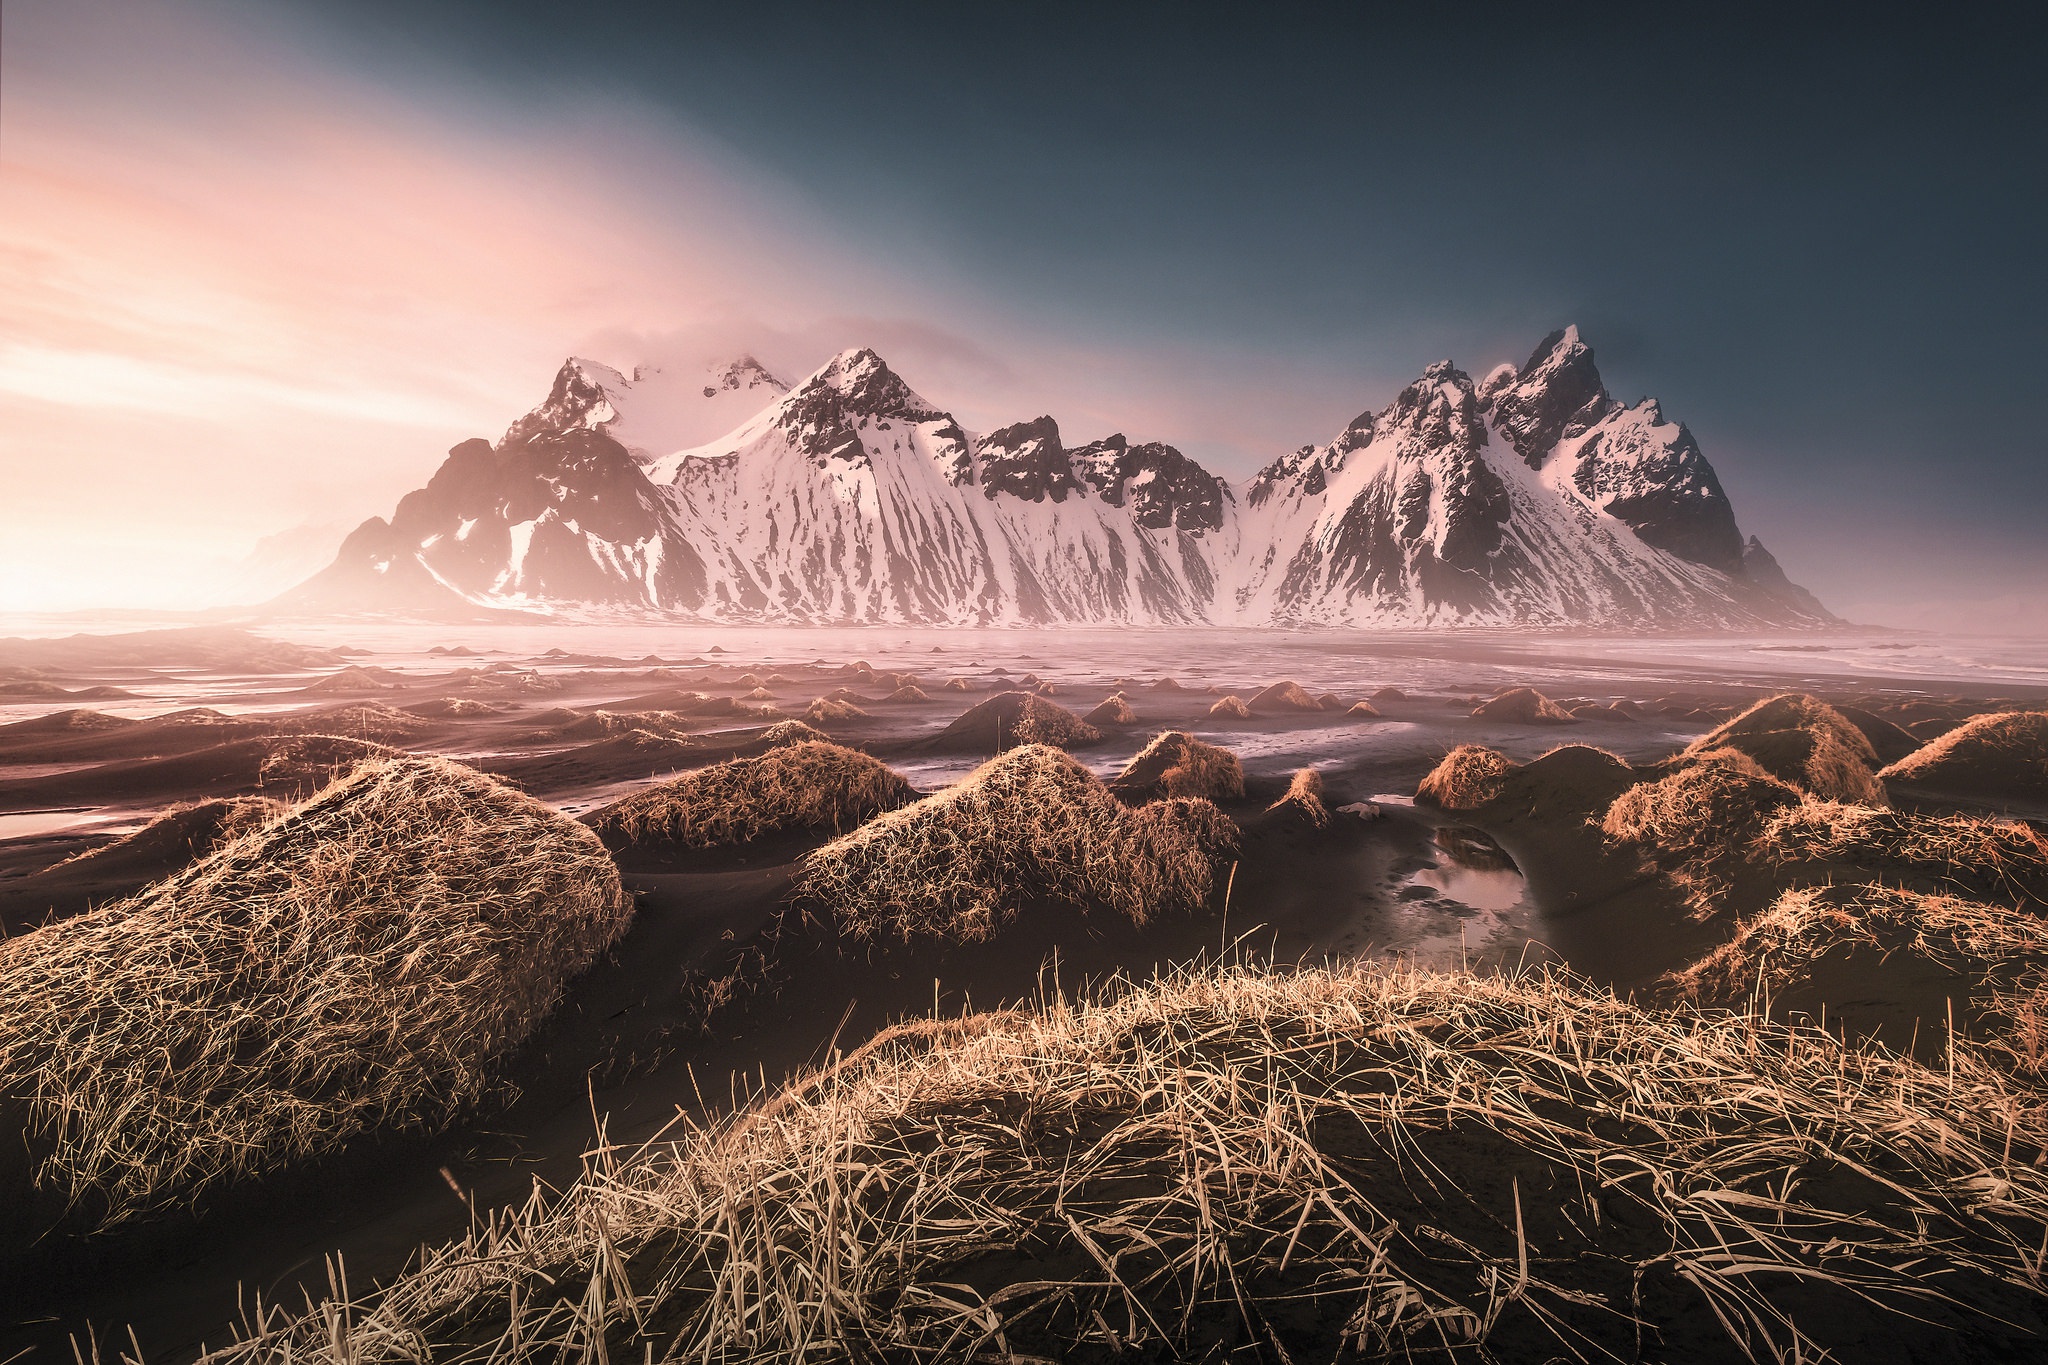 General 2048x1365 mountains nature landscape Iceland